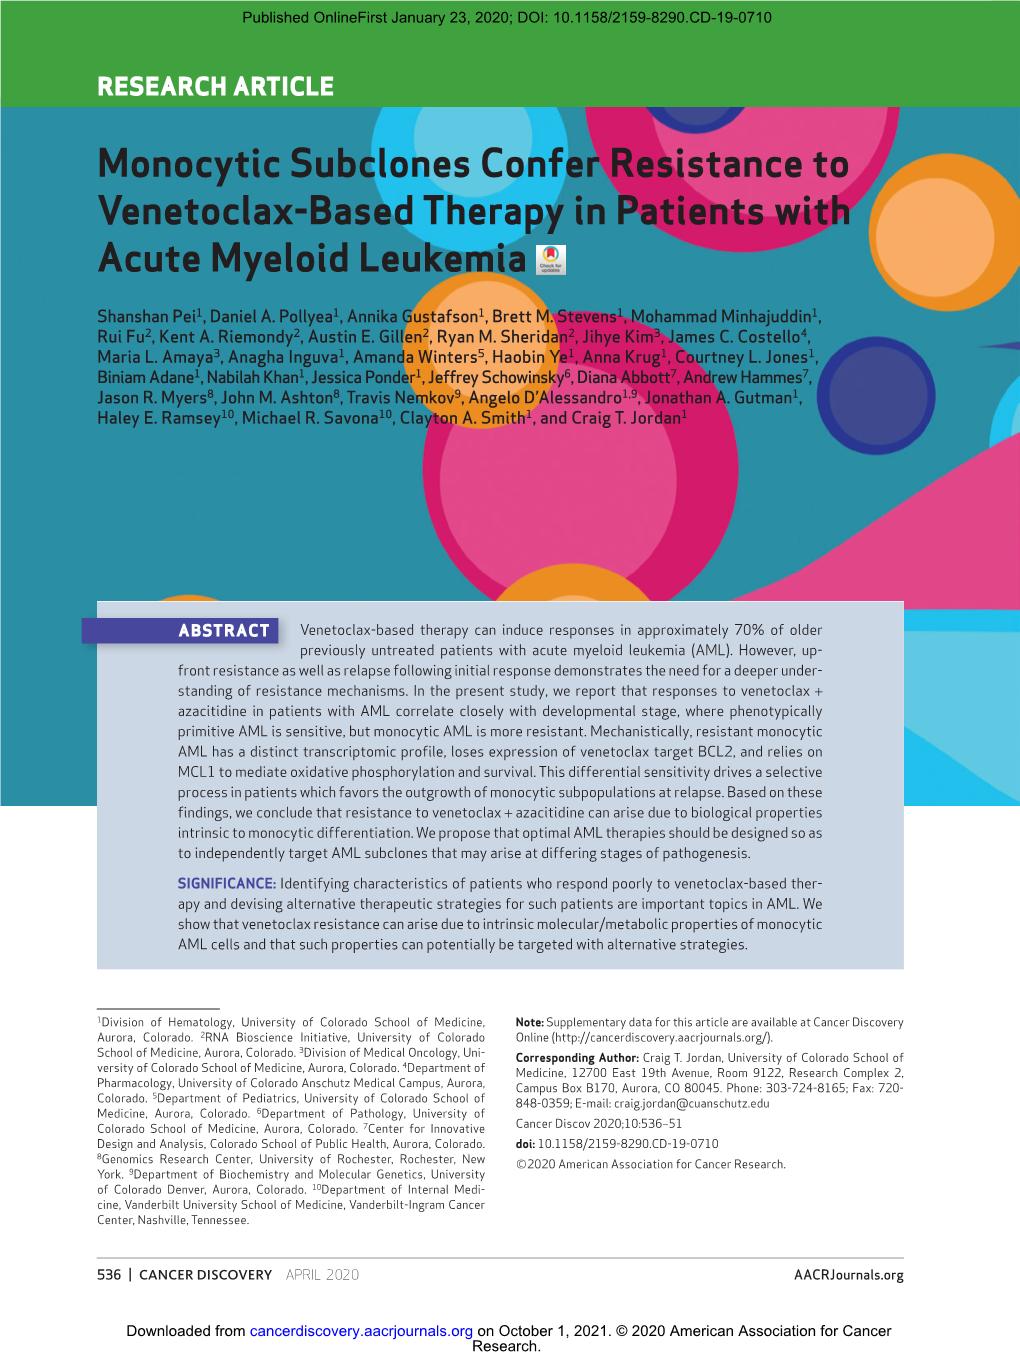 Monocytic Subclones Confer Resistance to Venetoclax-Based Therapy in Patients with Acute Myeloid Leukemia